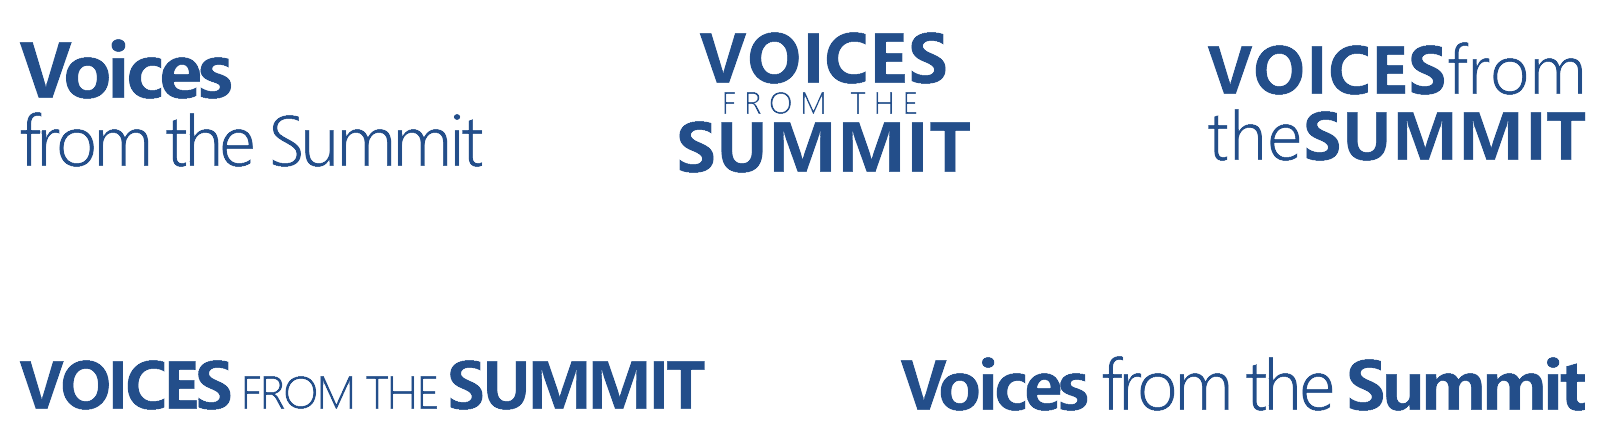 Variations of the words Voices from the Summit laid out in different ways in blue text.